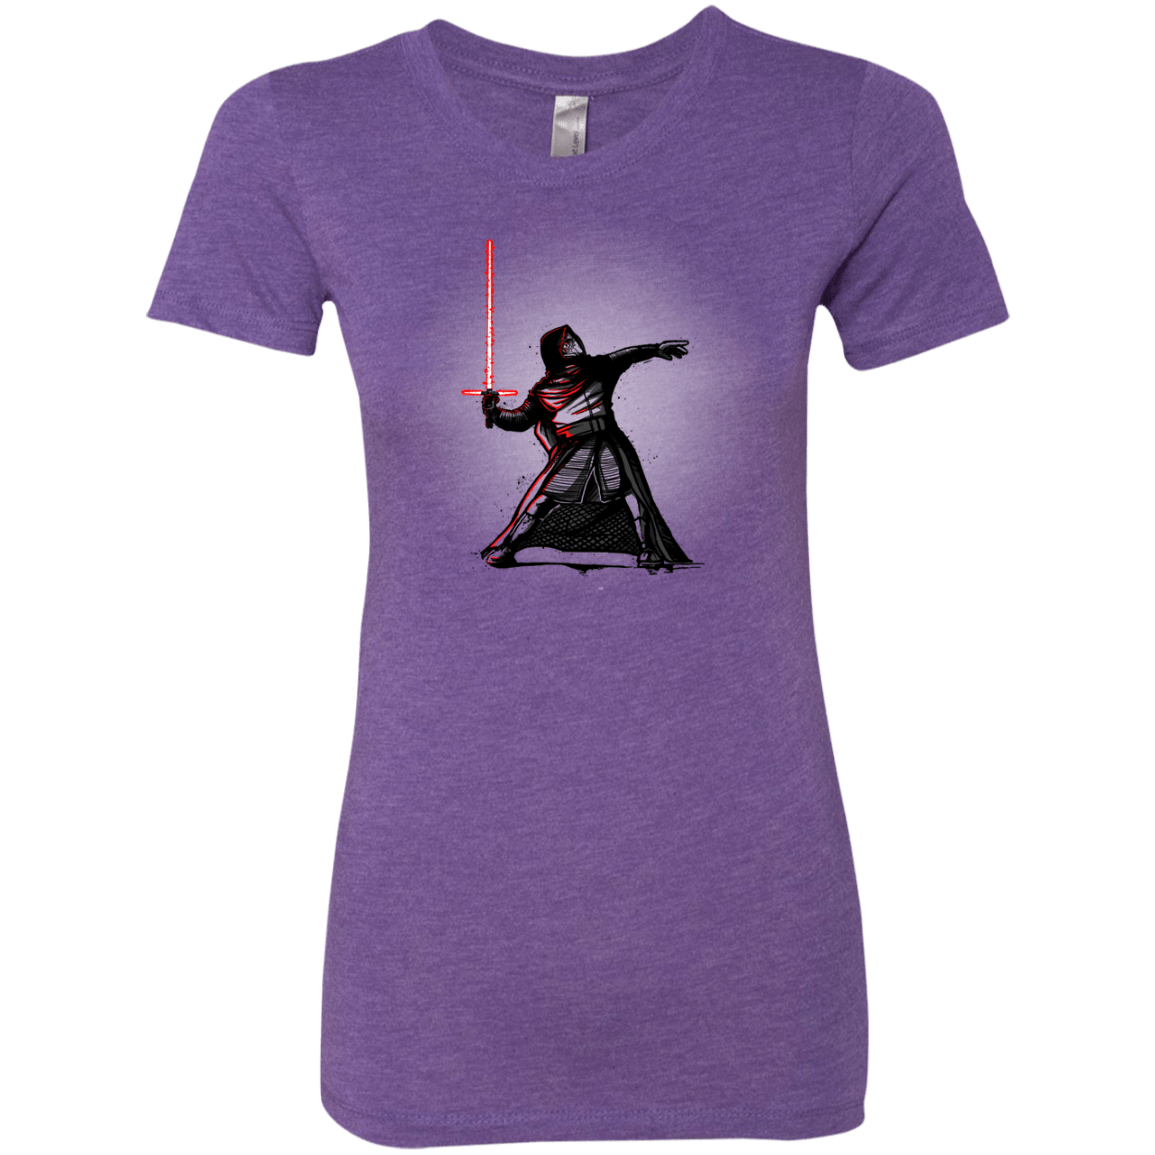 T-Shirts Purple Rush / Small For The Order Women's Triblend T-Shirt